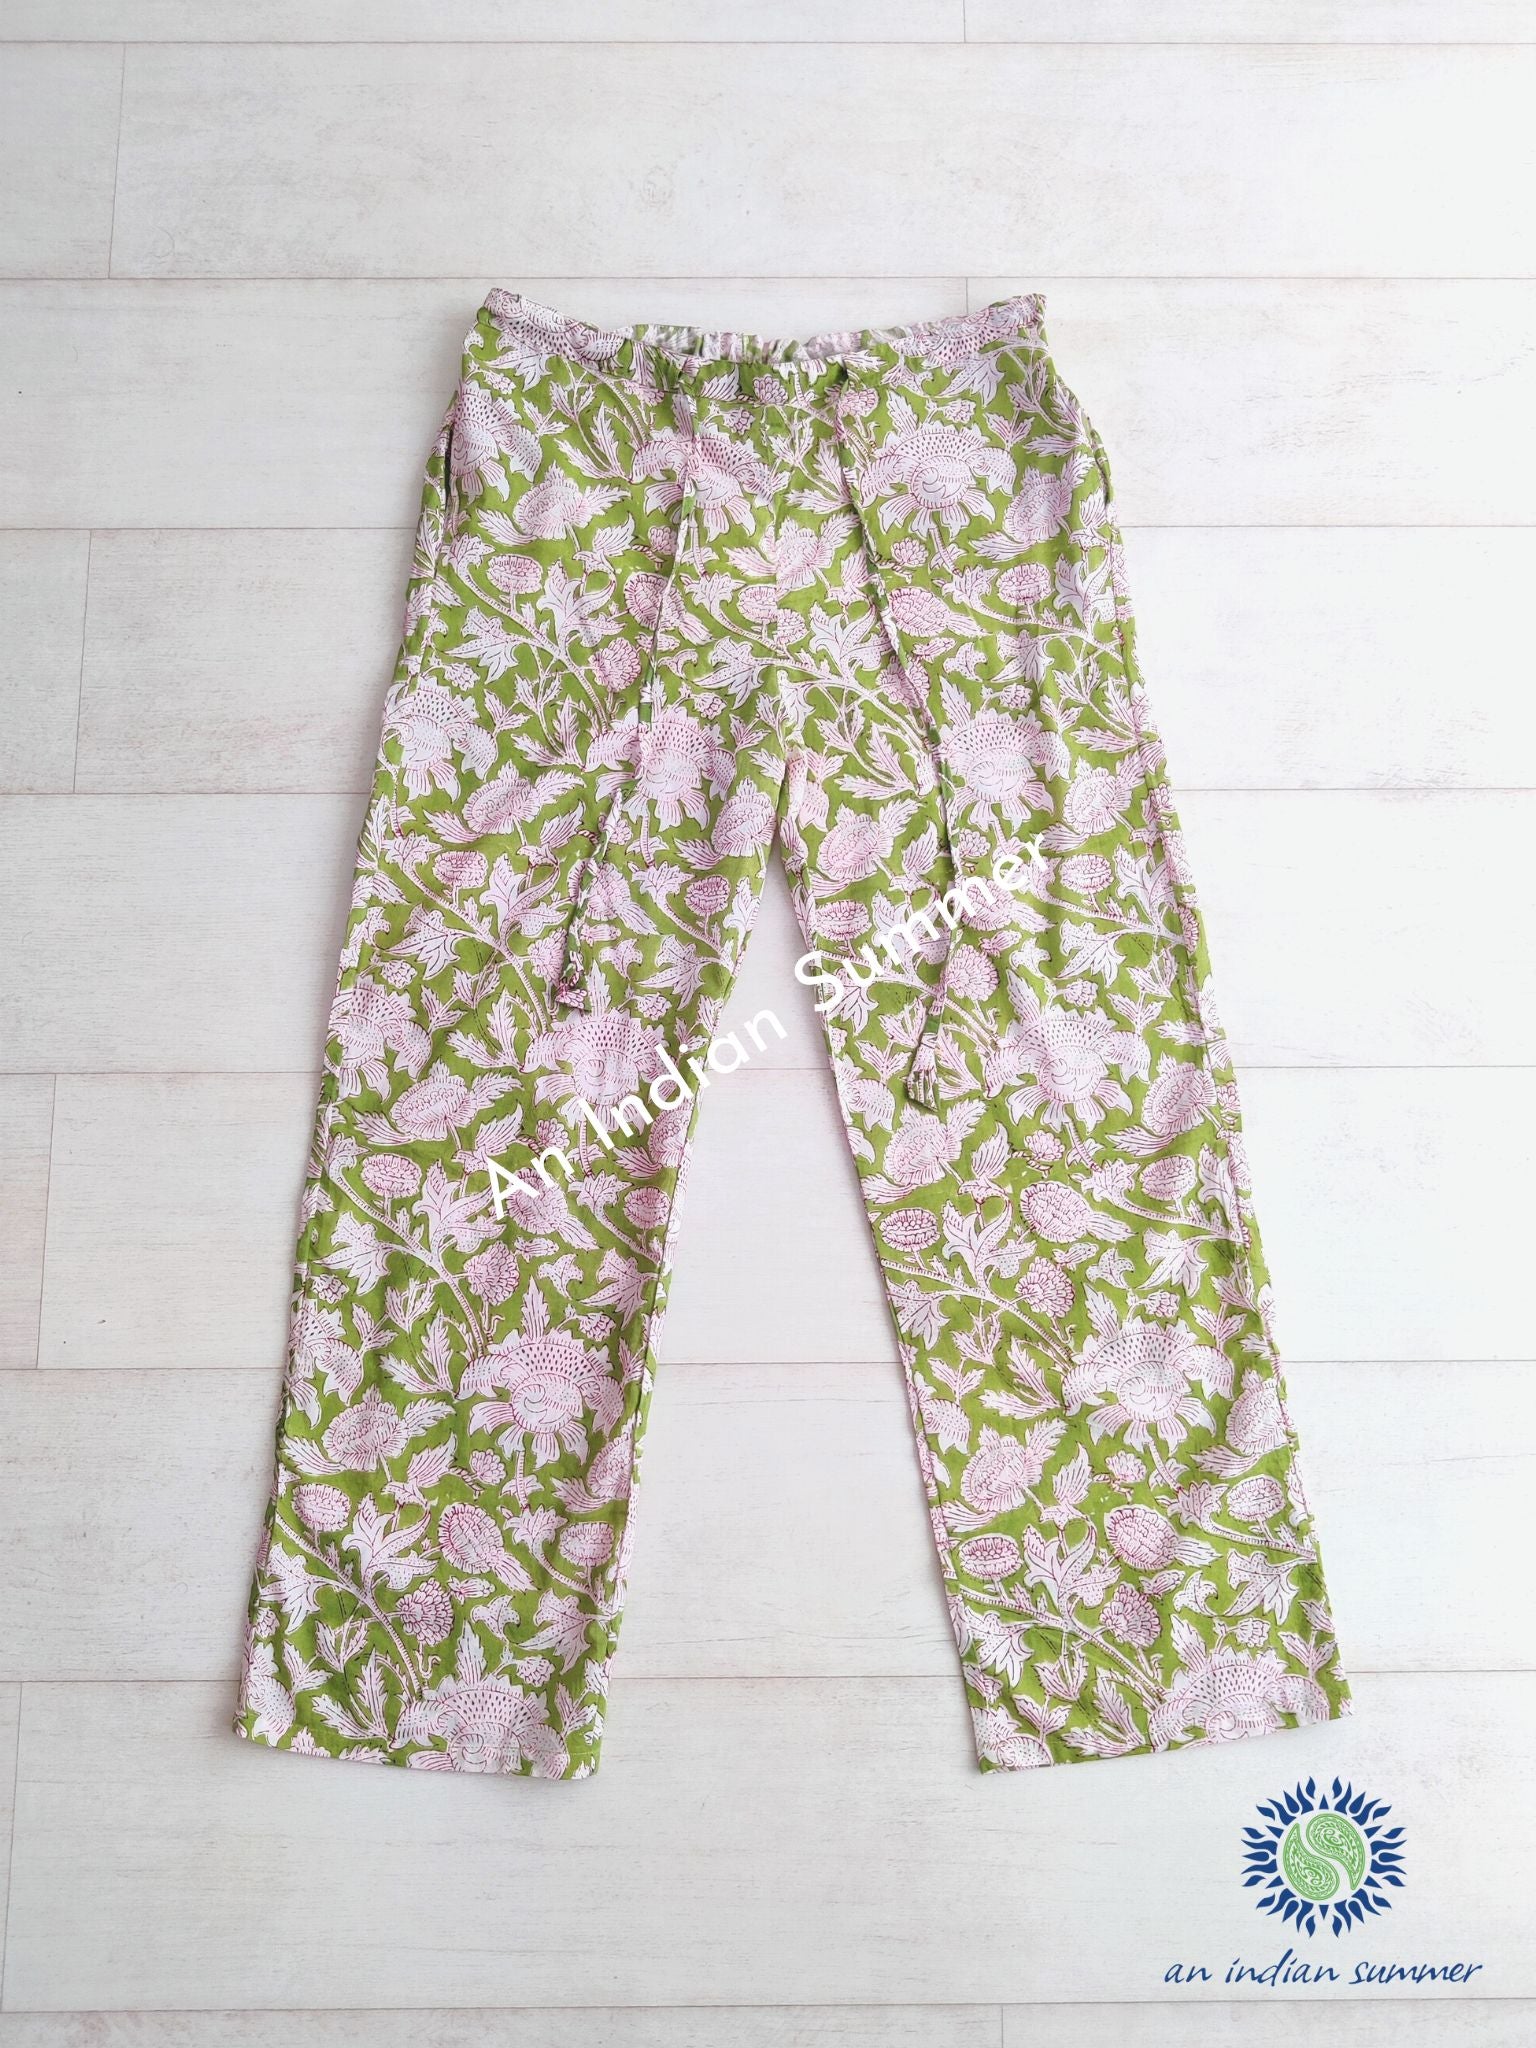 Cotton Trousers | Thistle | Apple Green | Botanical Block Print | Hand Block Printed | Cotton Voile | An Indian Summer | Seasonless Timeless Sustainable Ethical Authentic Artisan Conscious Clothing Lifestyle Brand